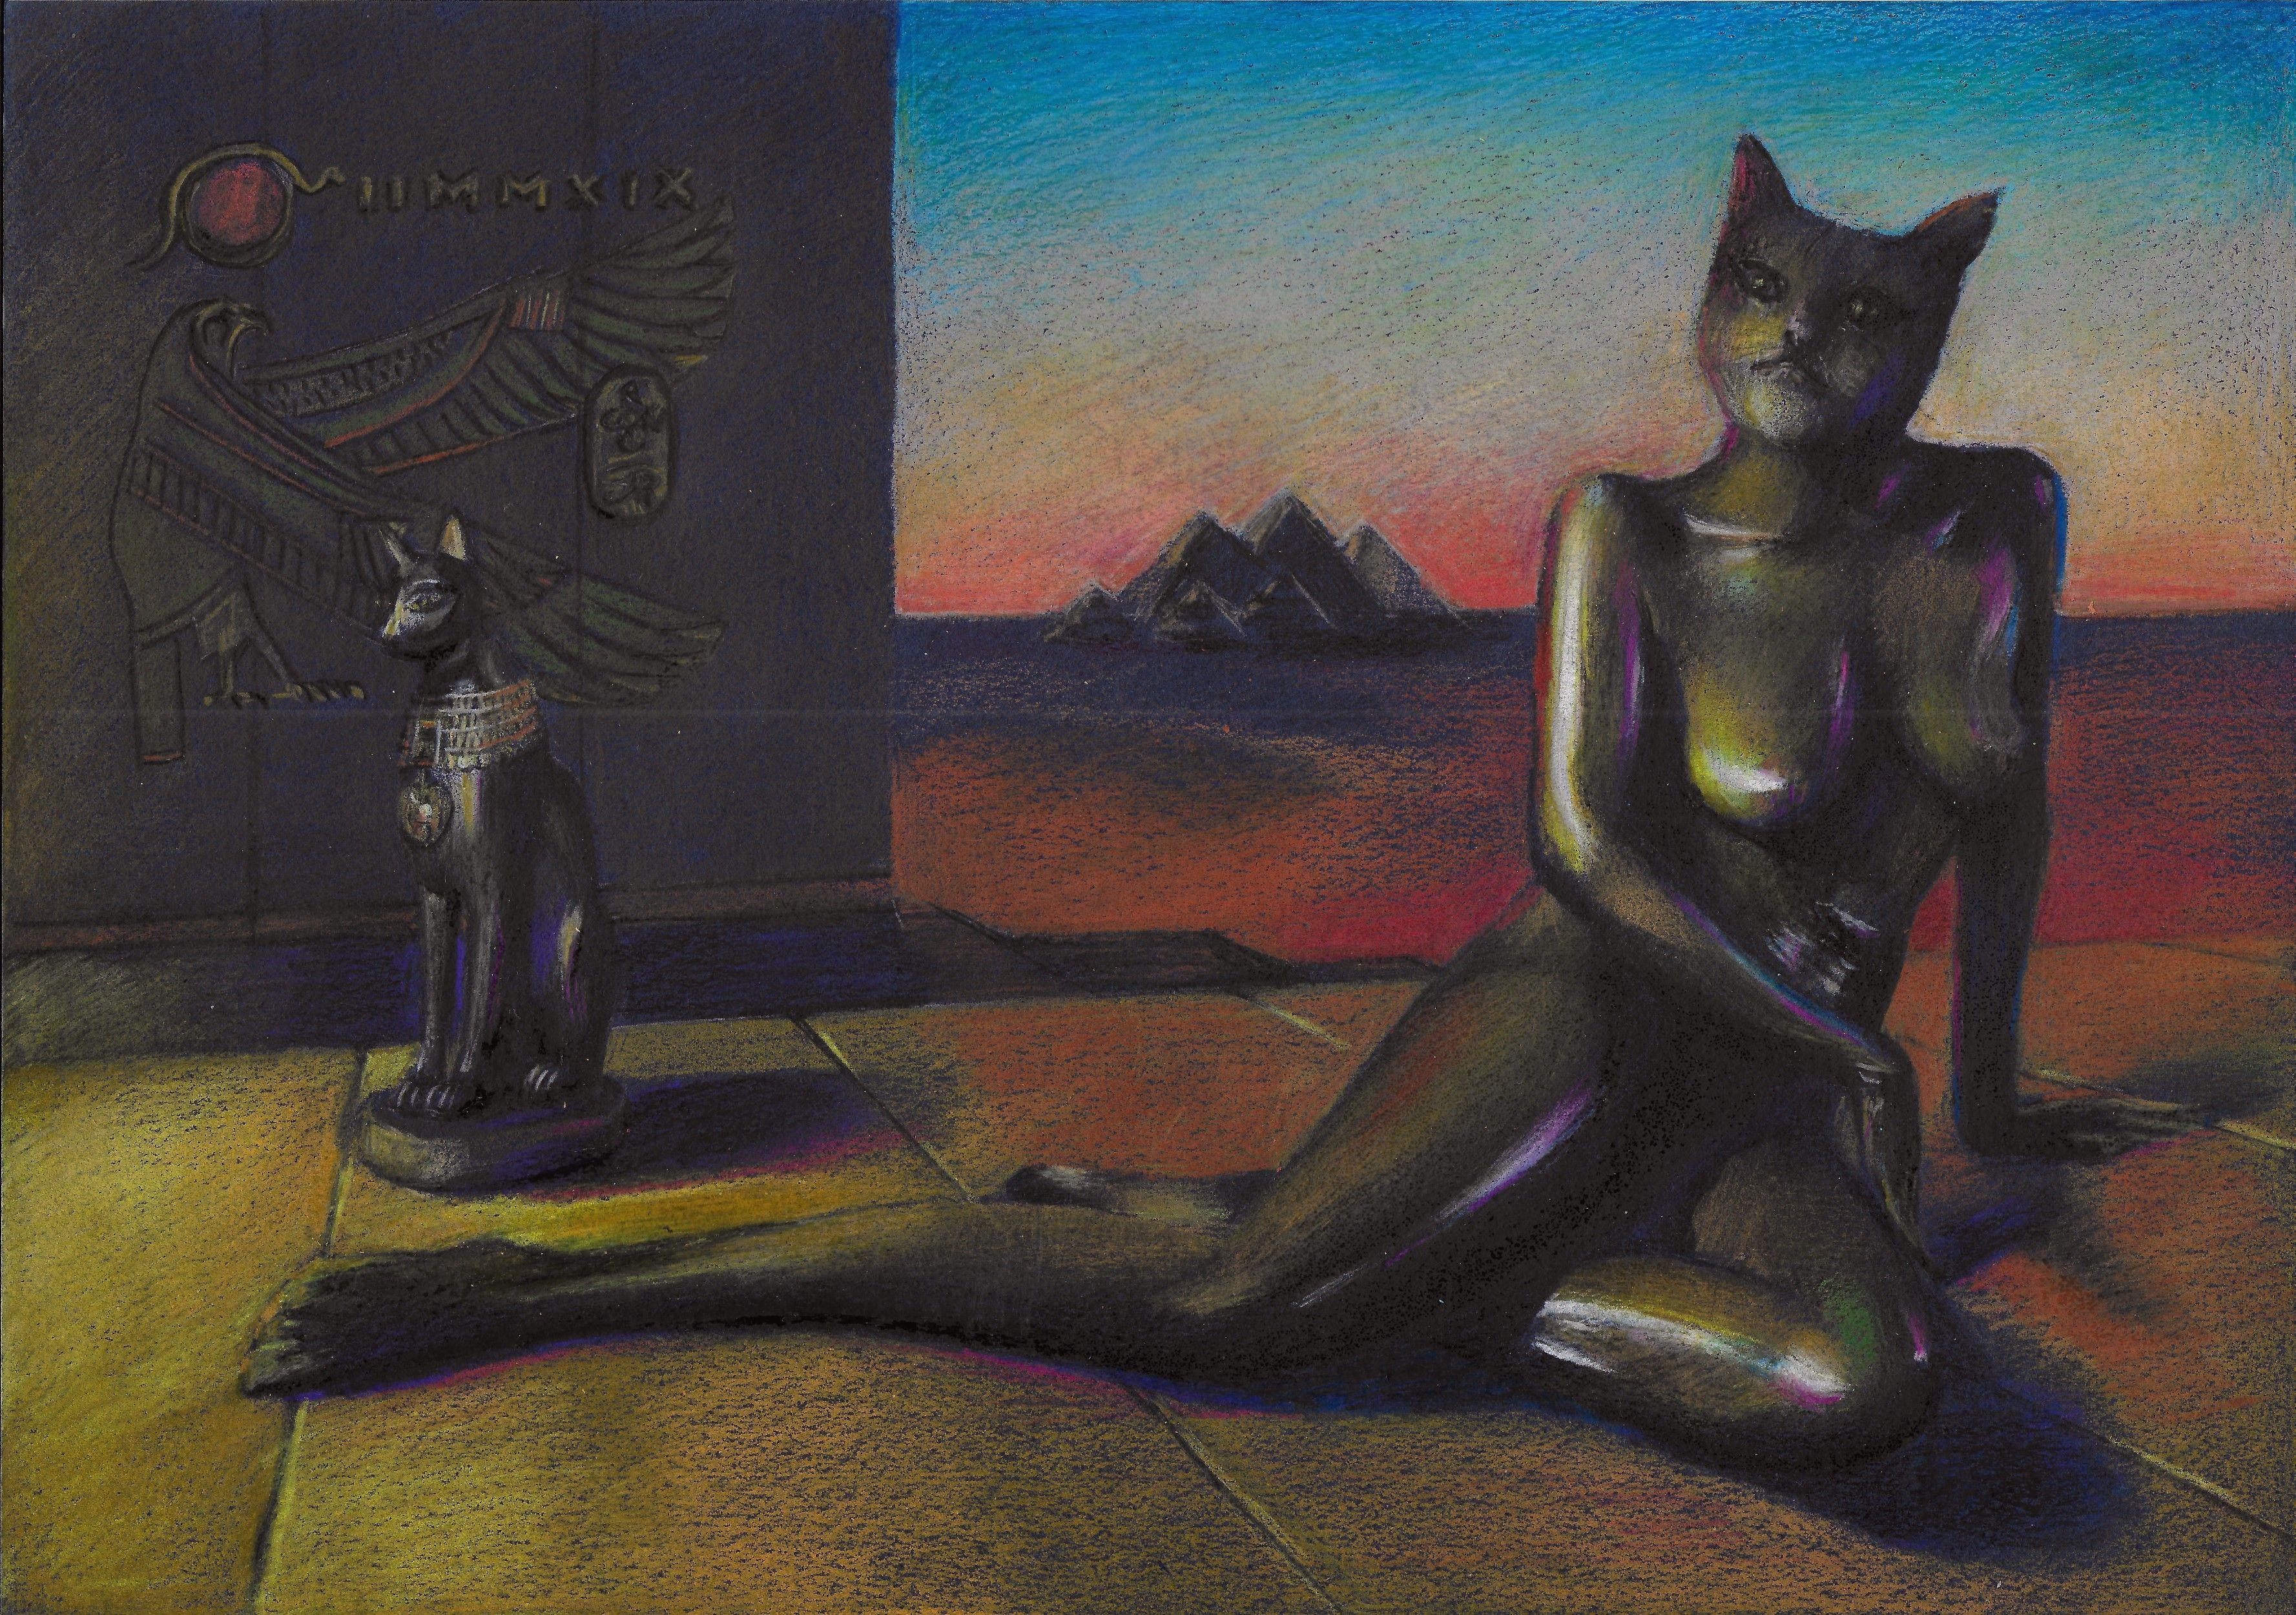 Bastet - 01-01-19, Drawing, Pencil/Colored Pencil on Paper - Art by Corne Akkers